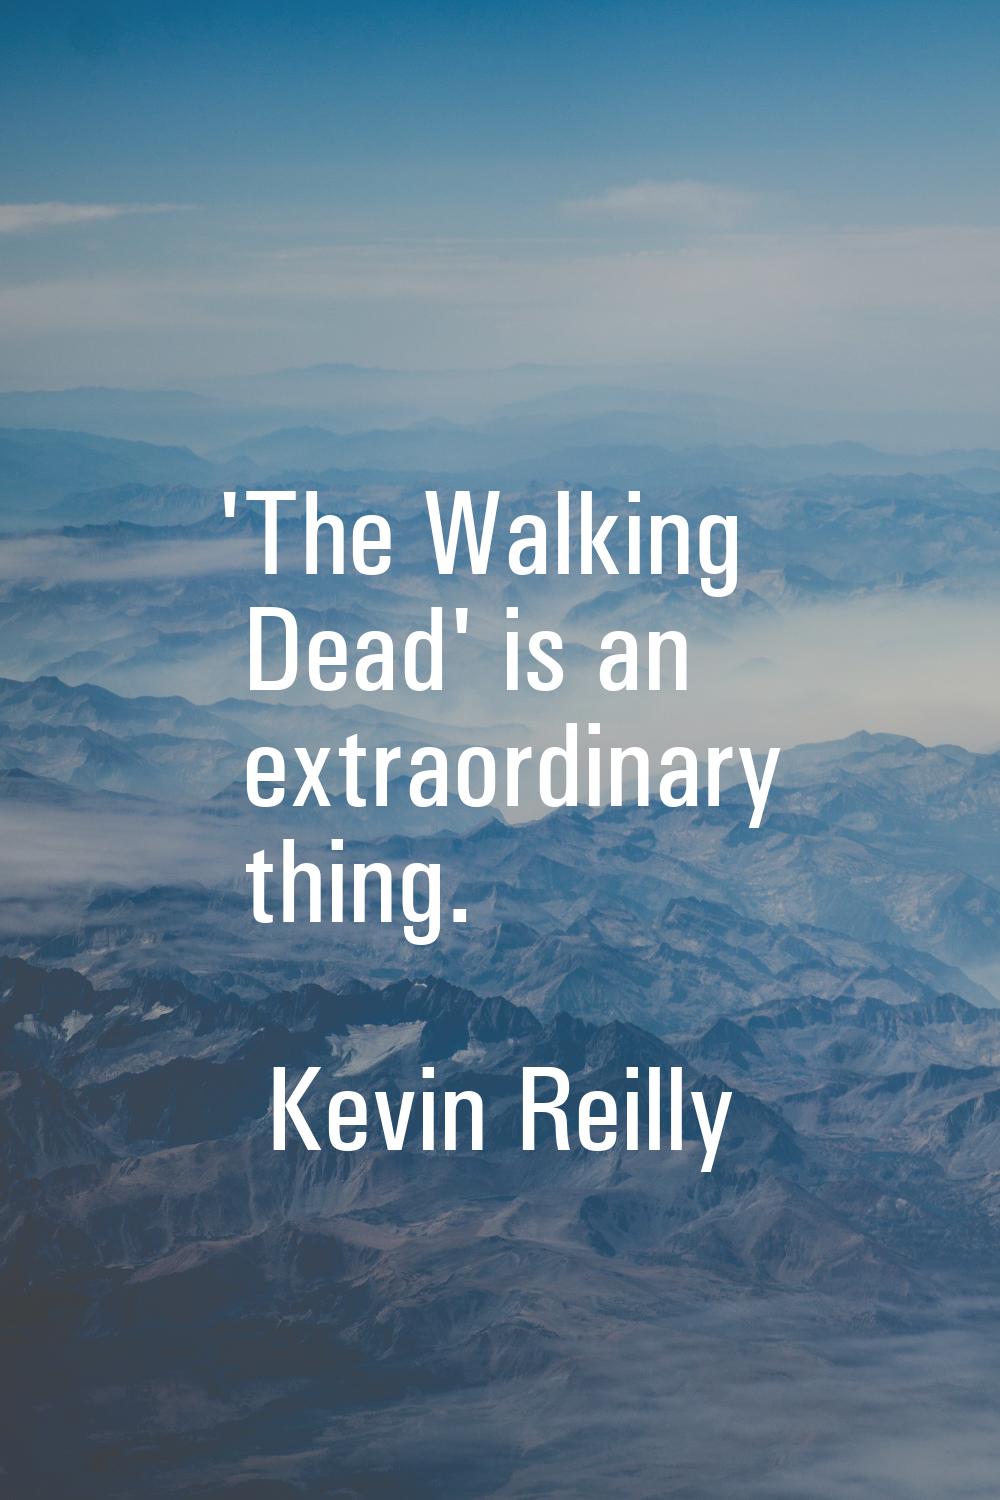 'The Walking Dead' is an extraordinary thing.